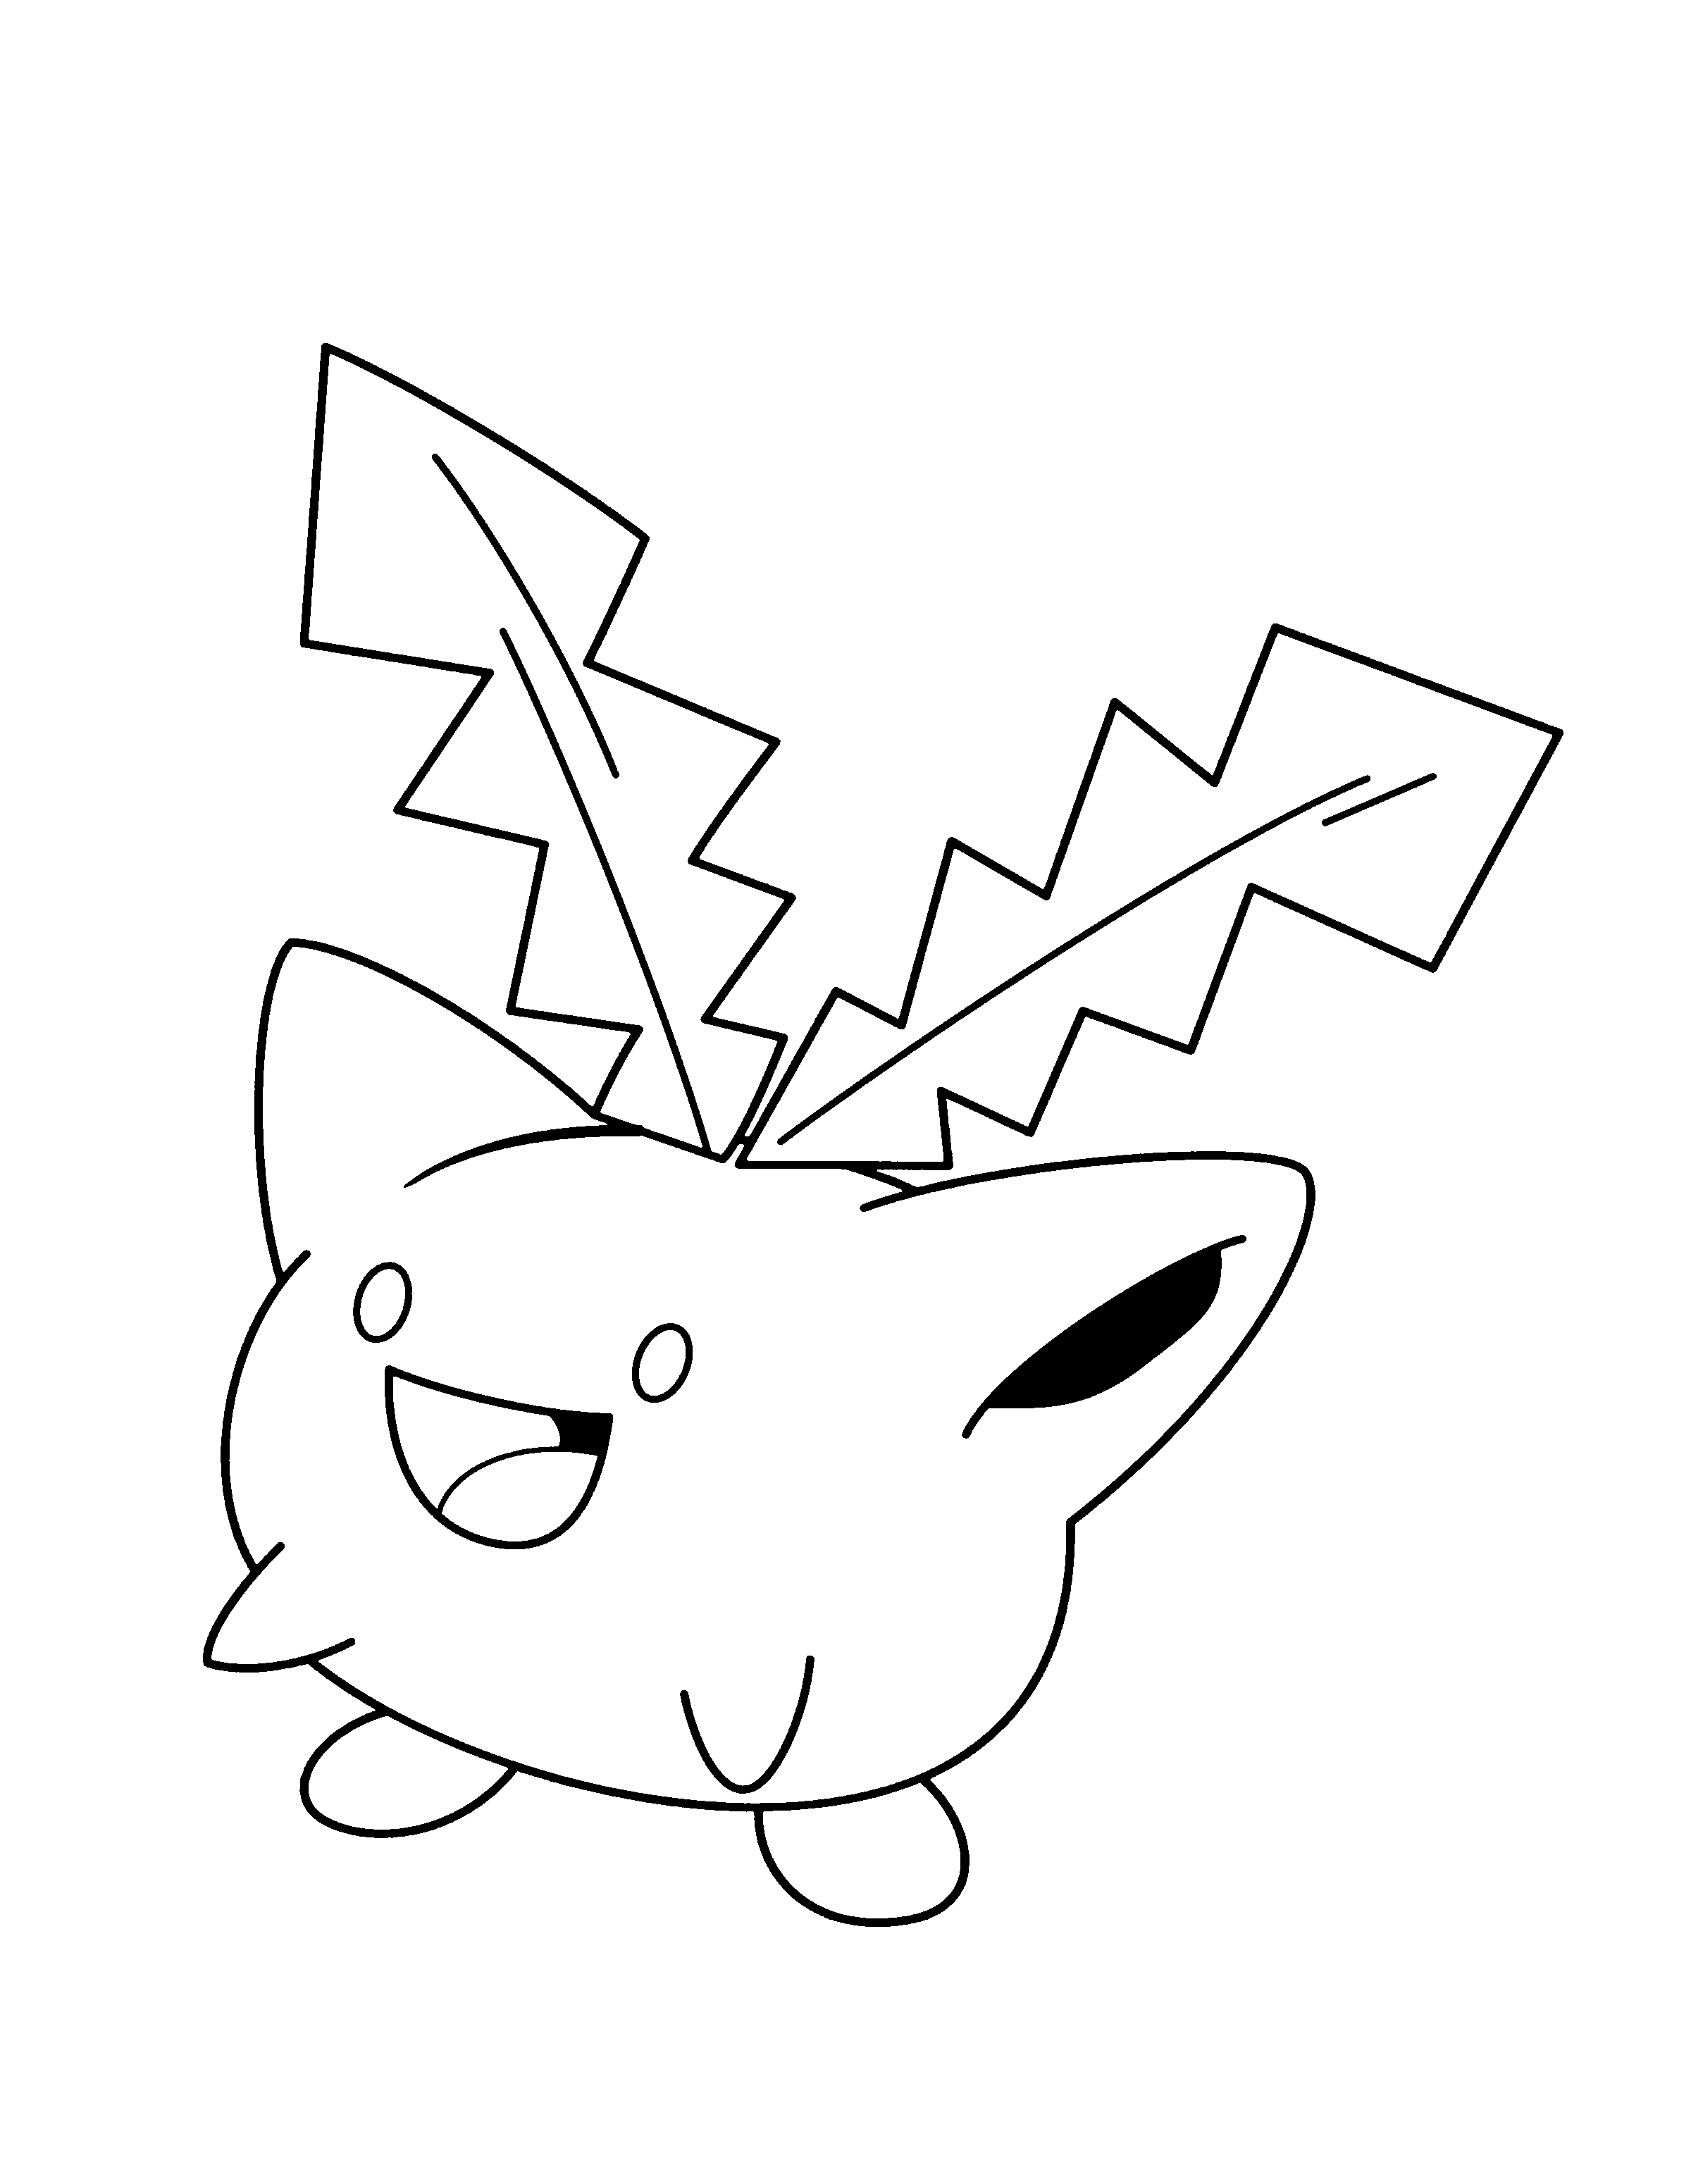 animated-coloring-pages-pokemon-image-0182